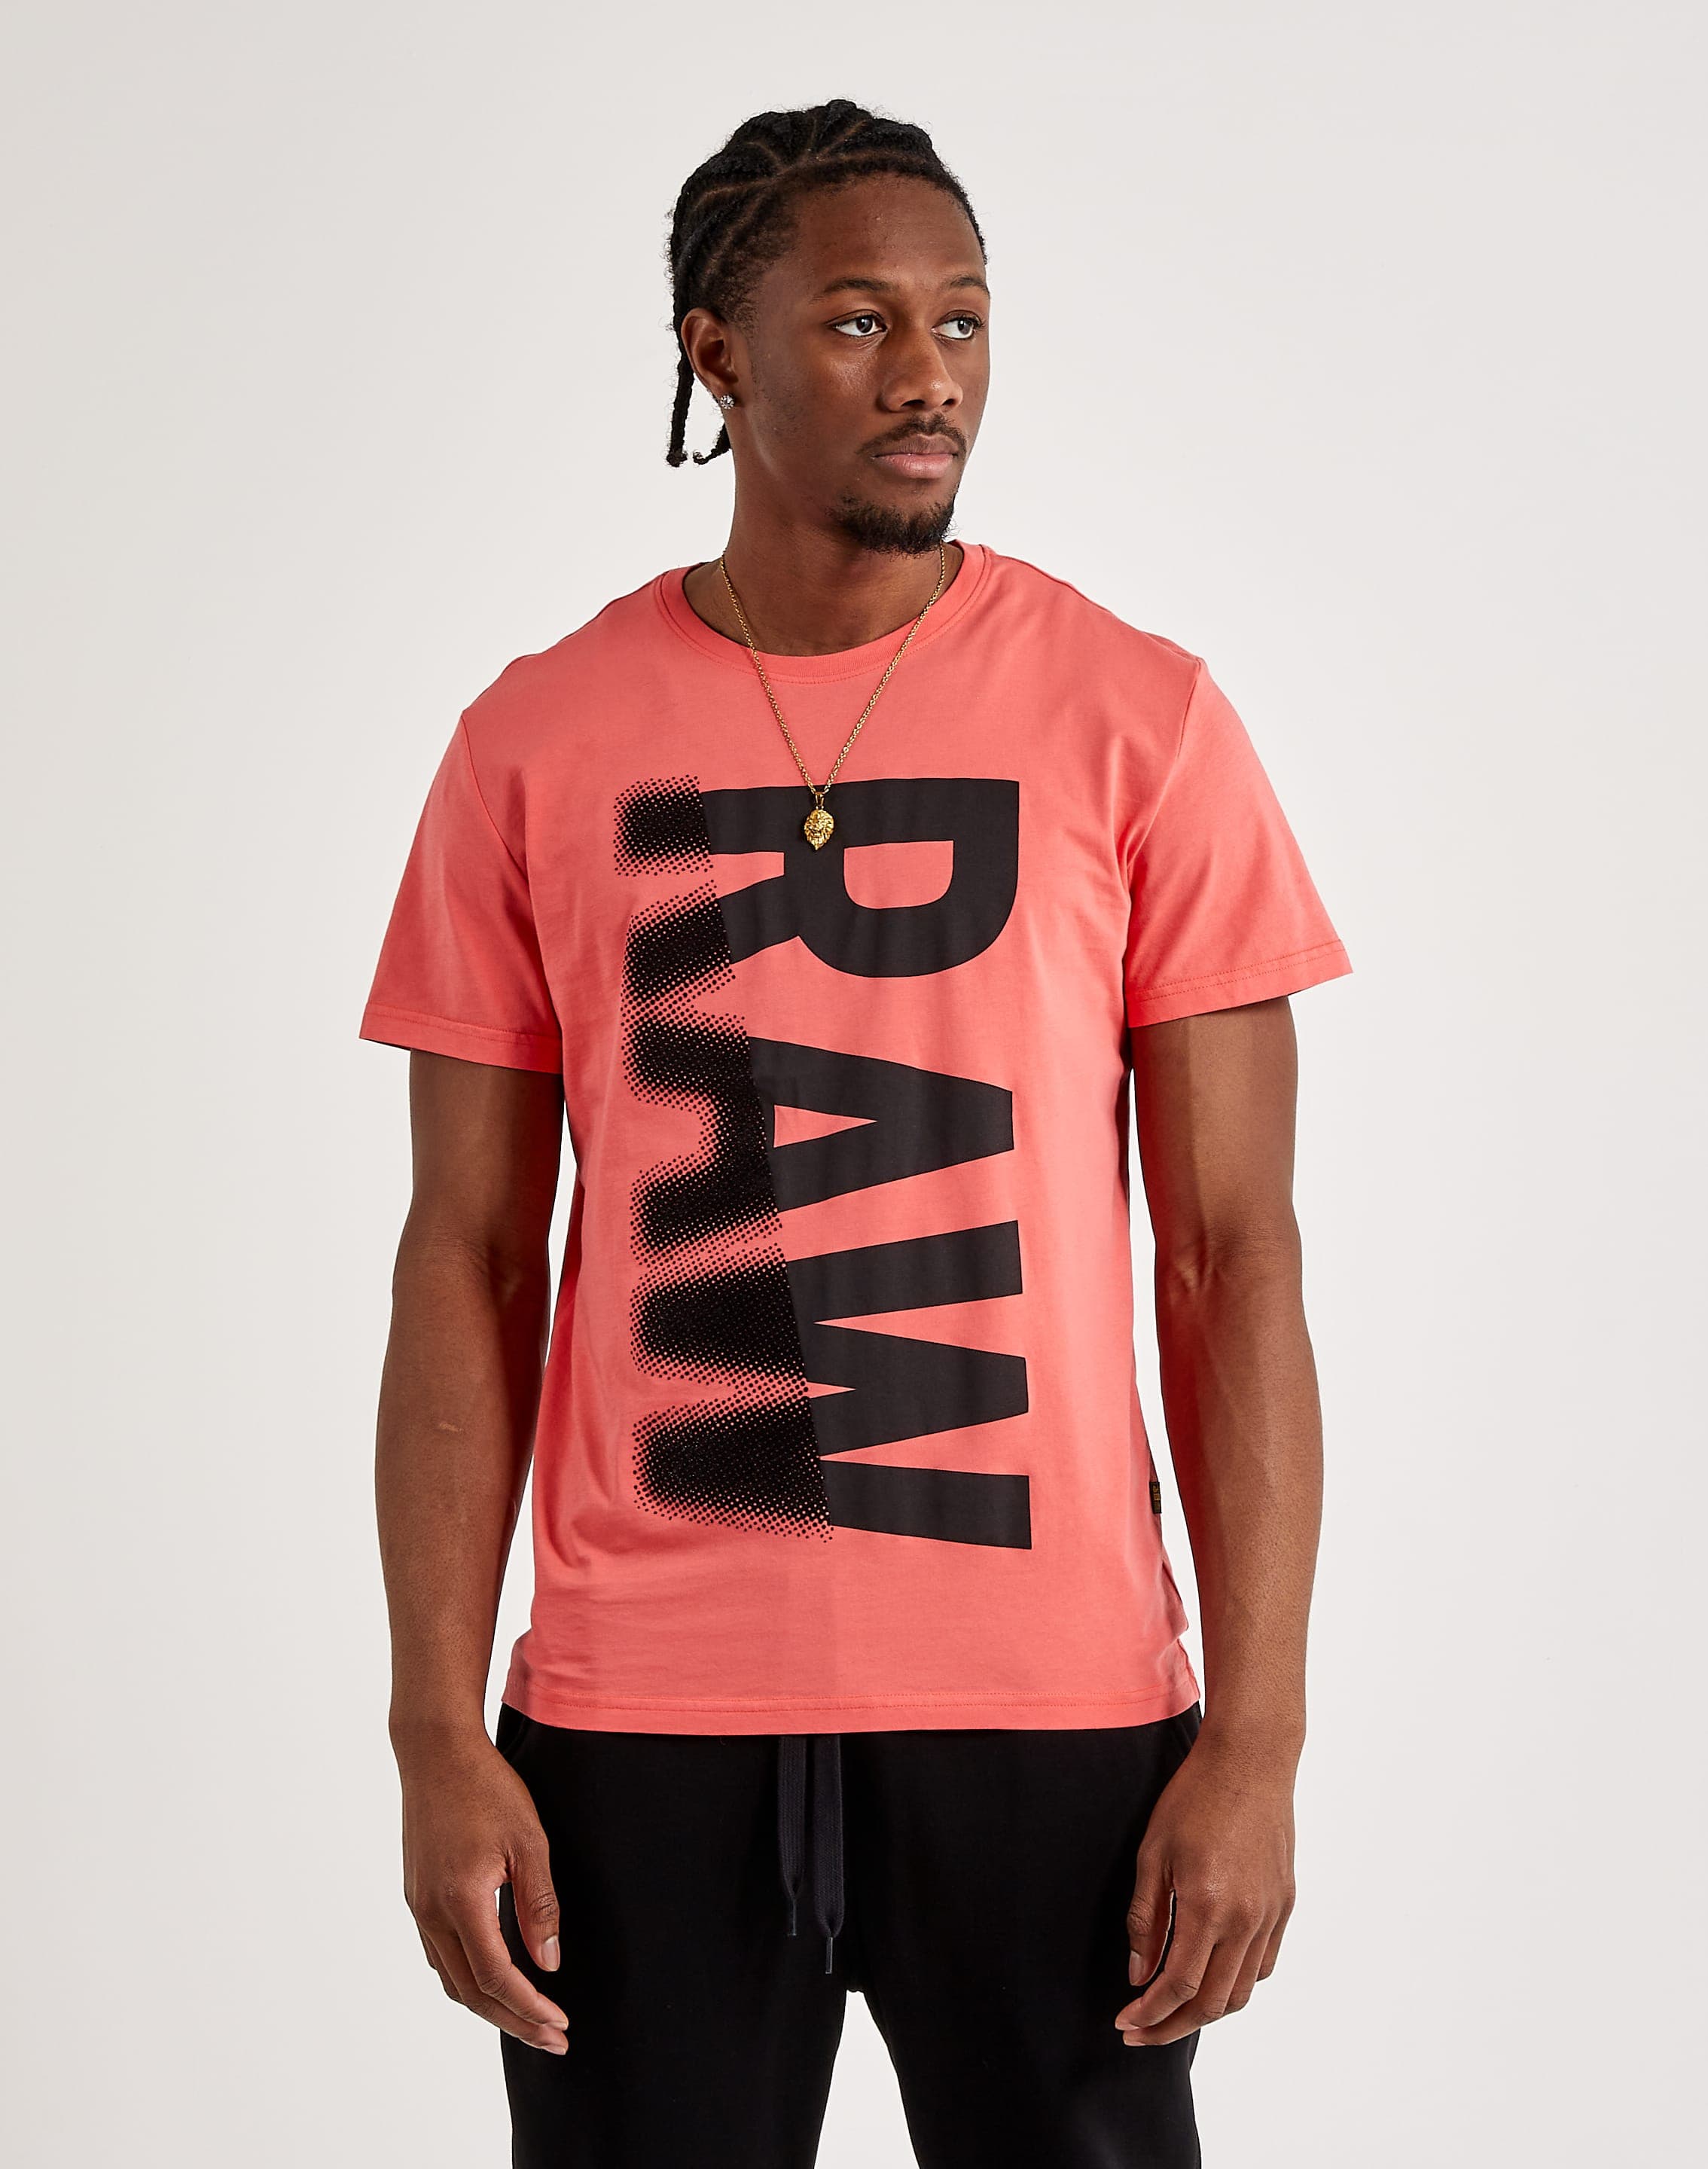 Raw – DTLR Tee Smudge G-Star